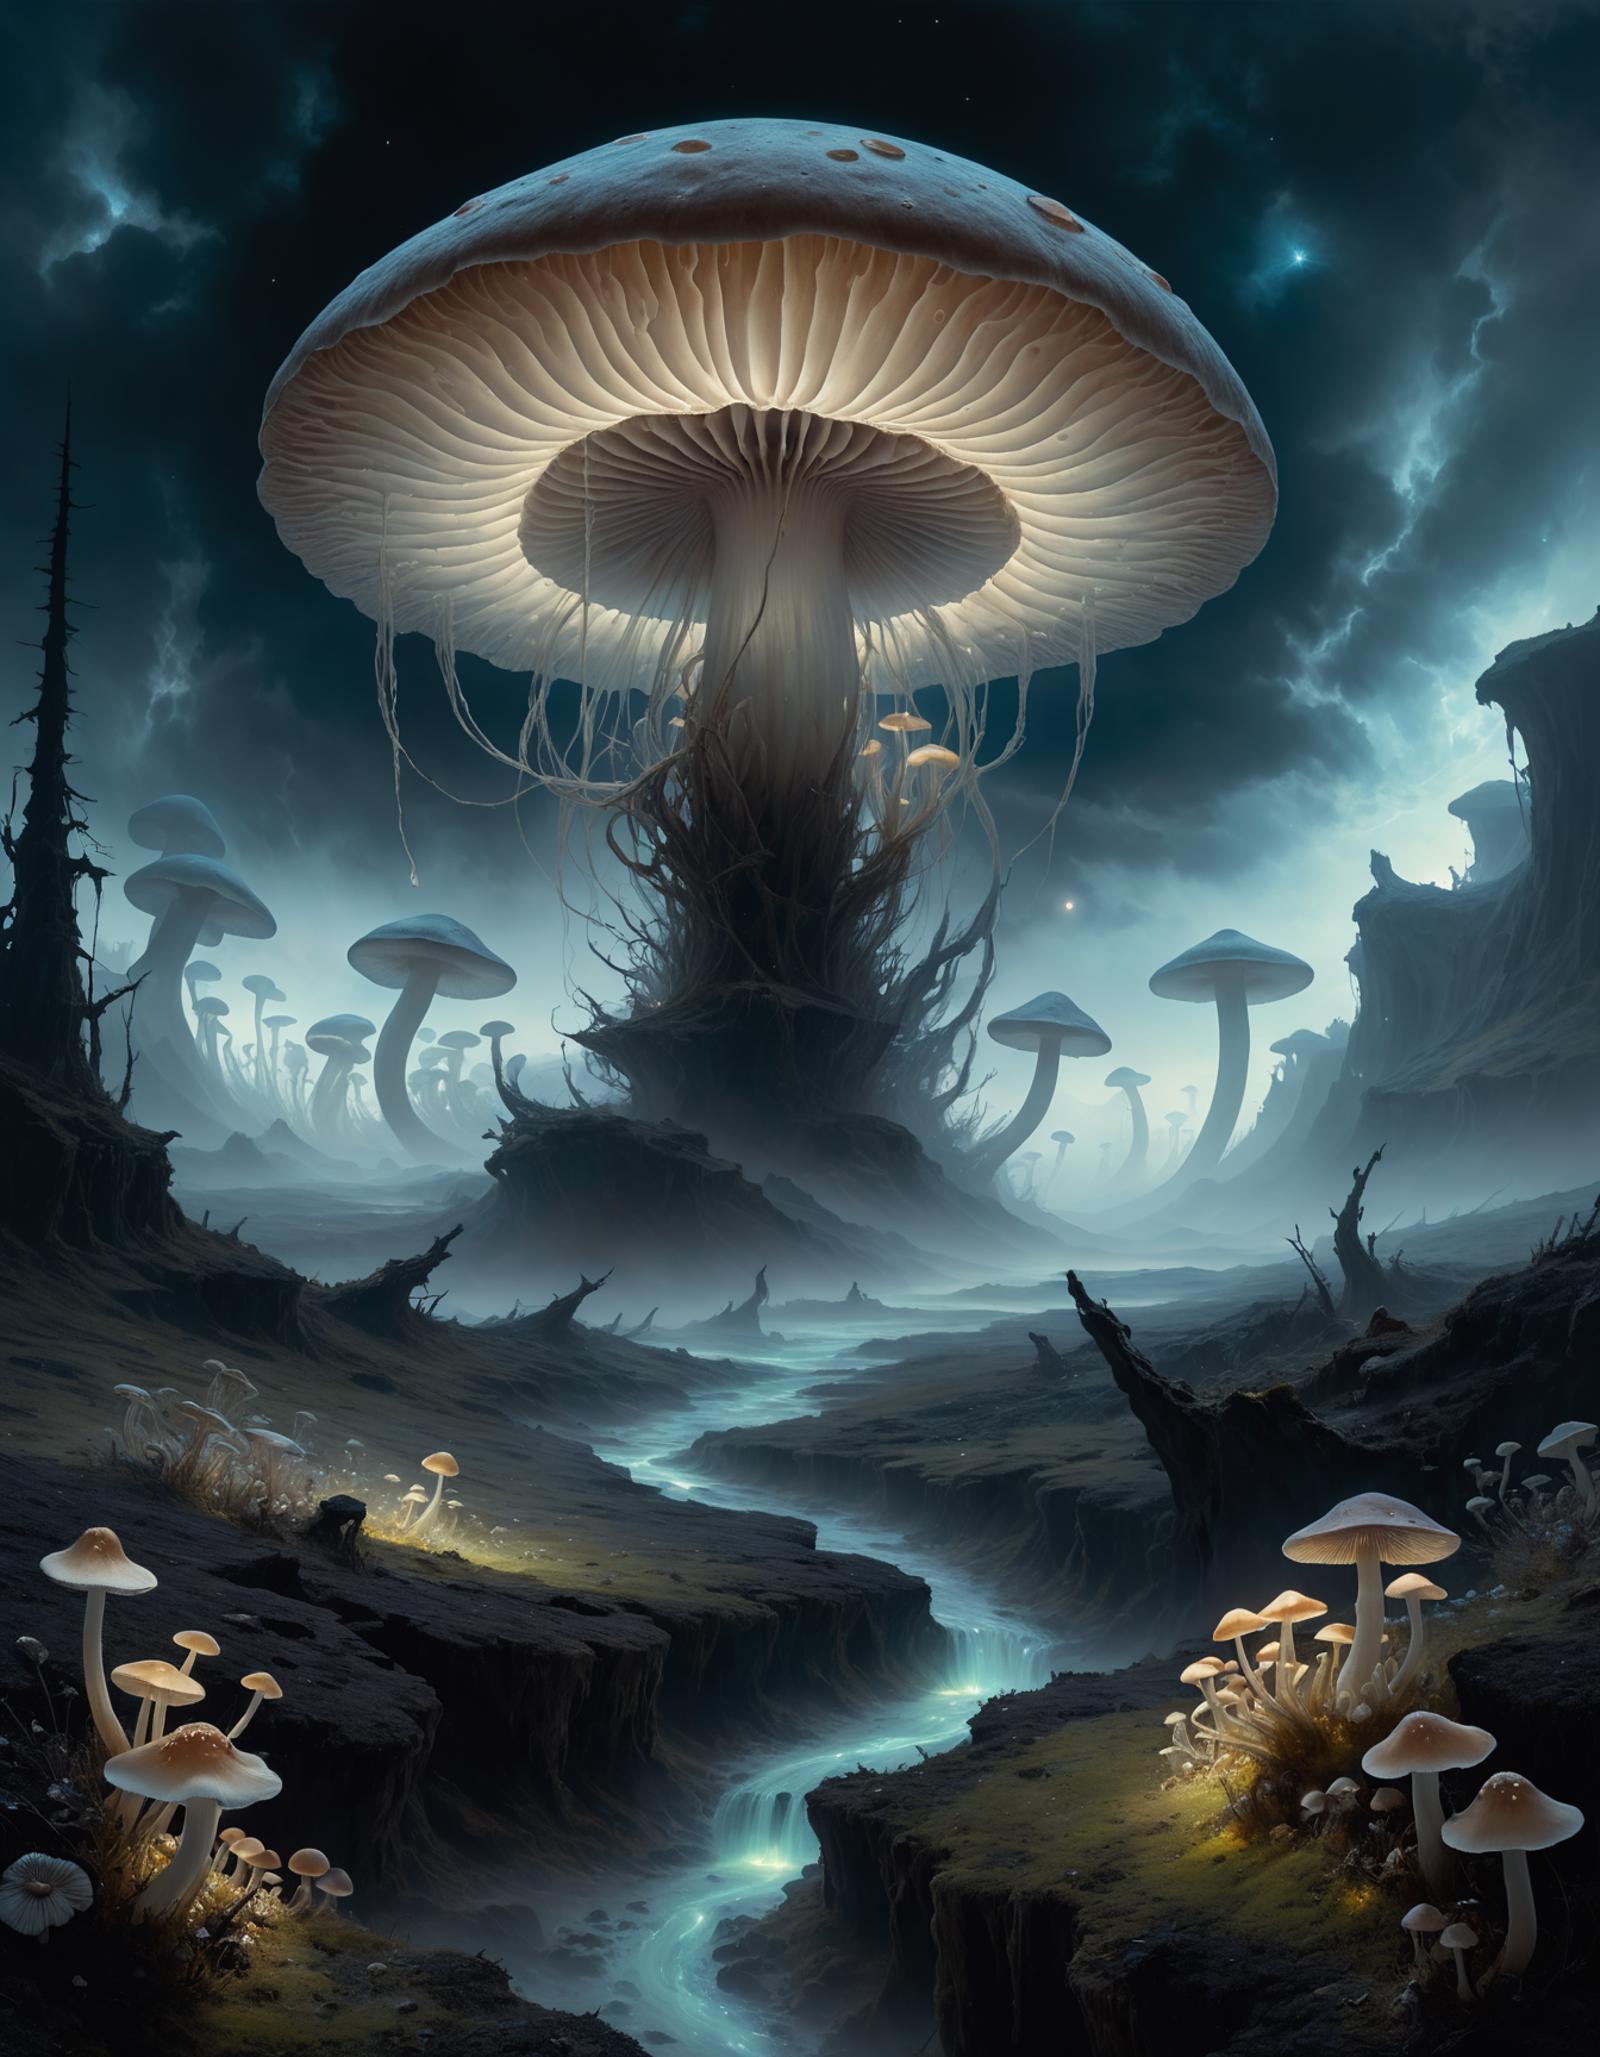 A mushroom forest with a glowing mushroom tree in the center, surrounded by other mushrooms on a dark night.